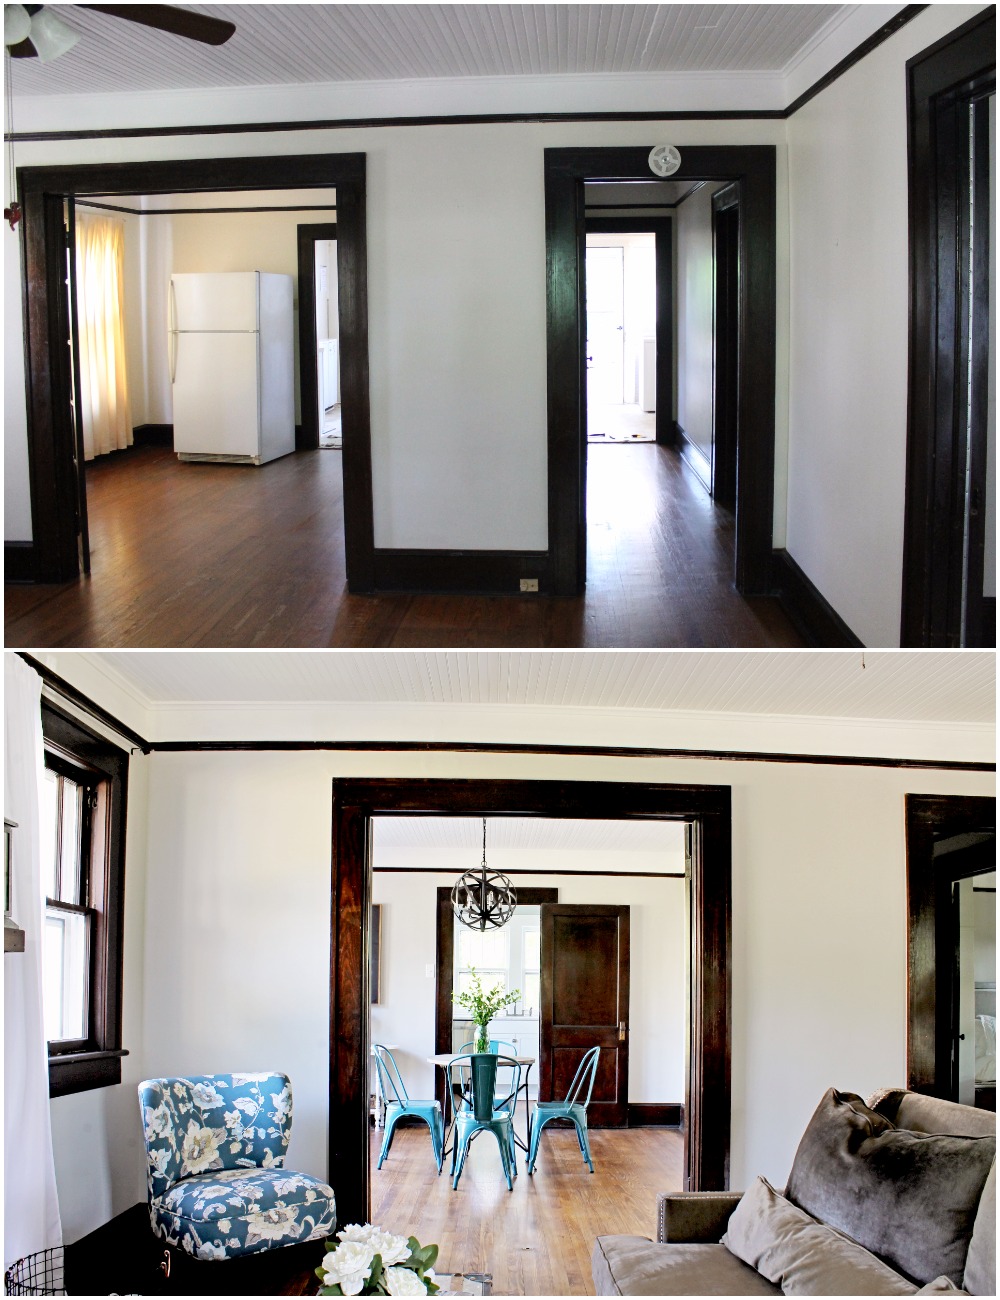 House Flipping Before and Afters - Living Room Budget Renovation Remodel, Wood Trim Paint Colors - Sherwin Williams Repose Gray (5).jpg